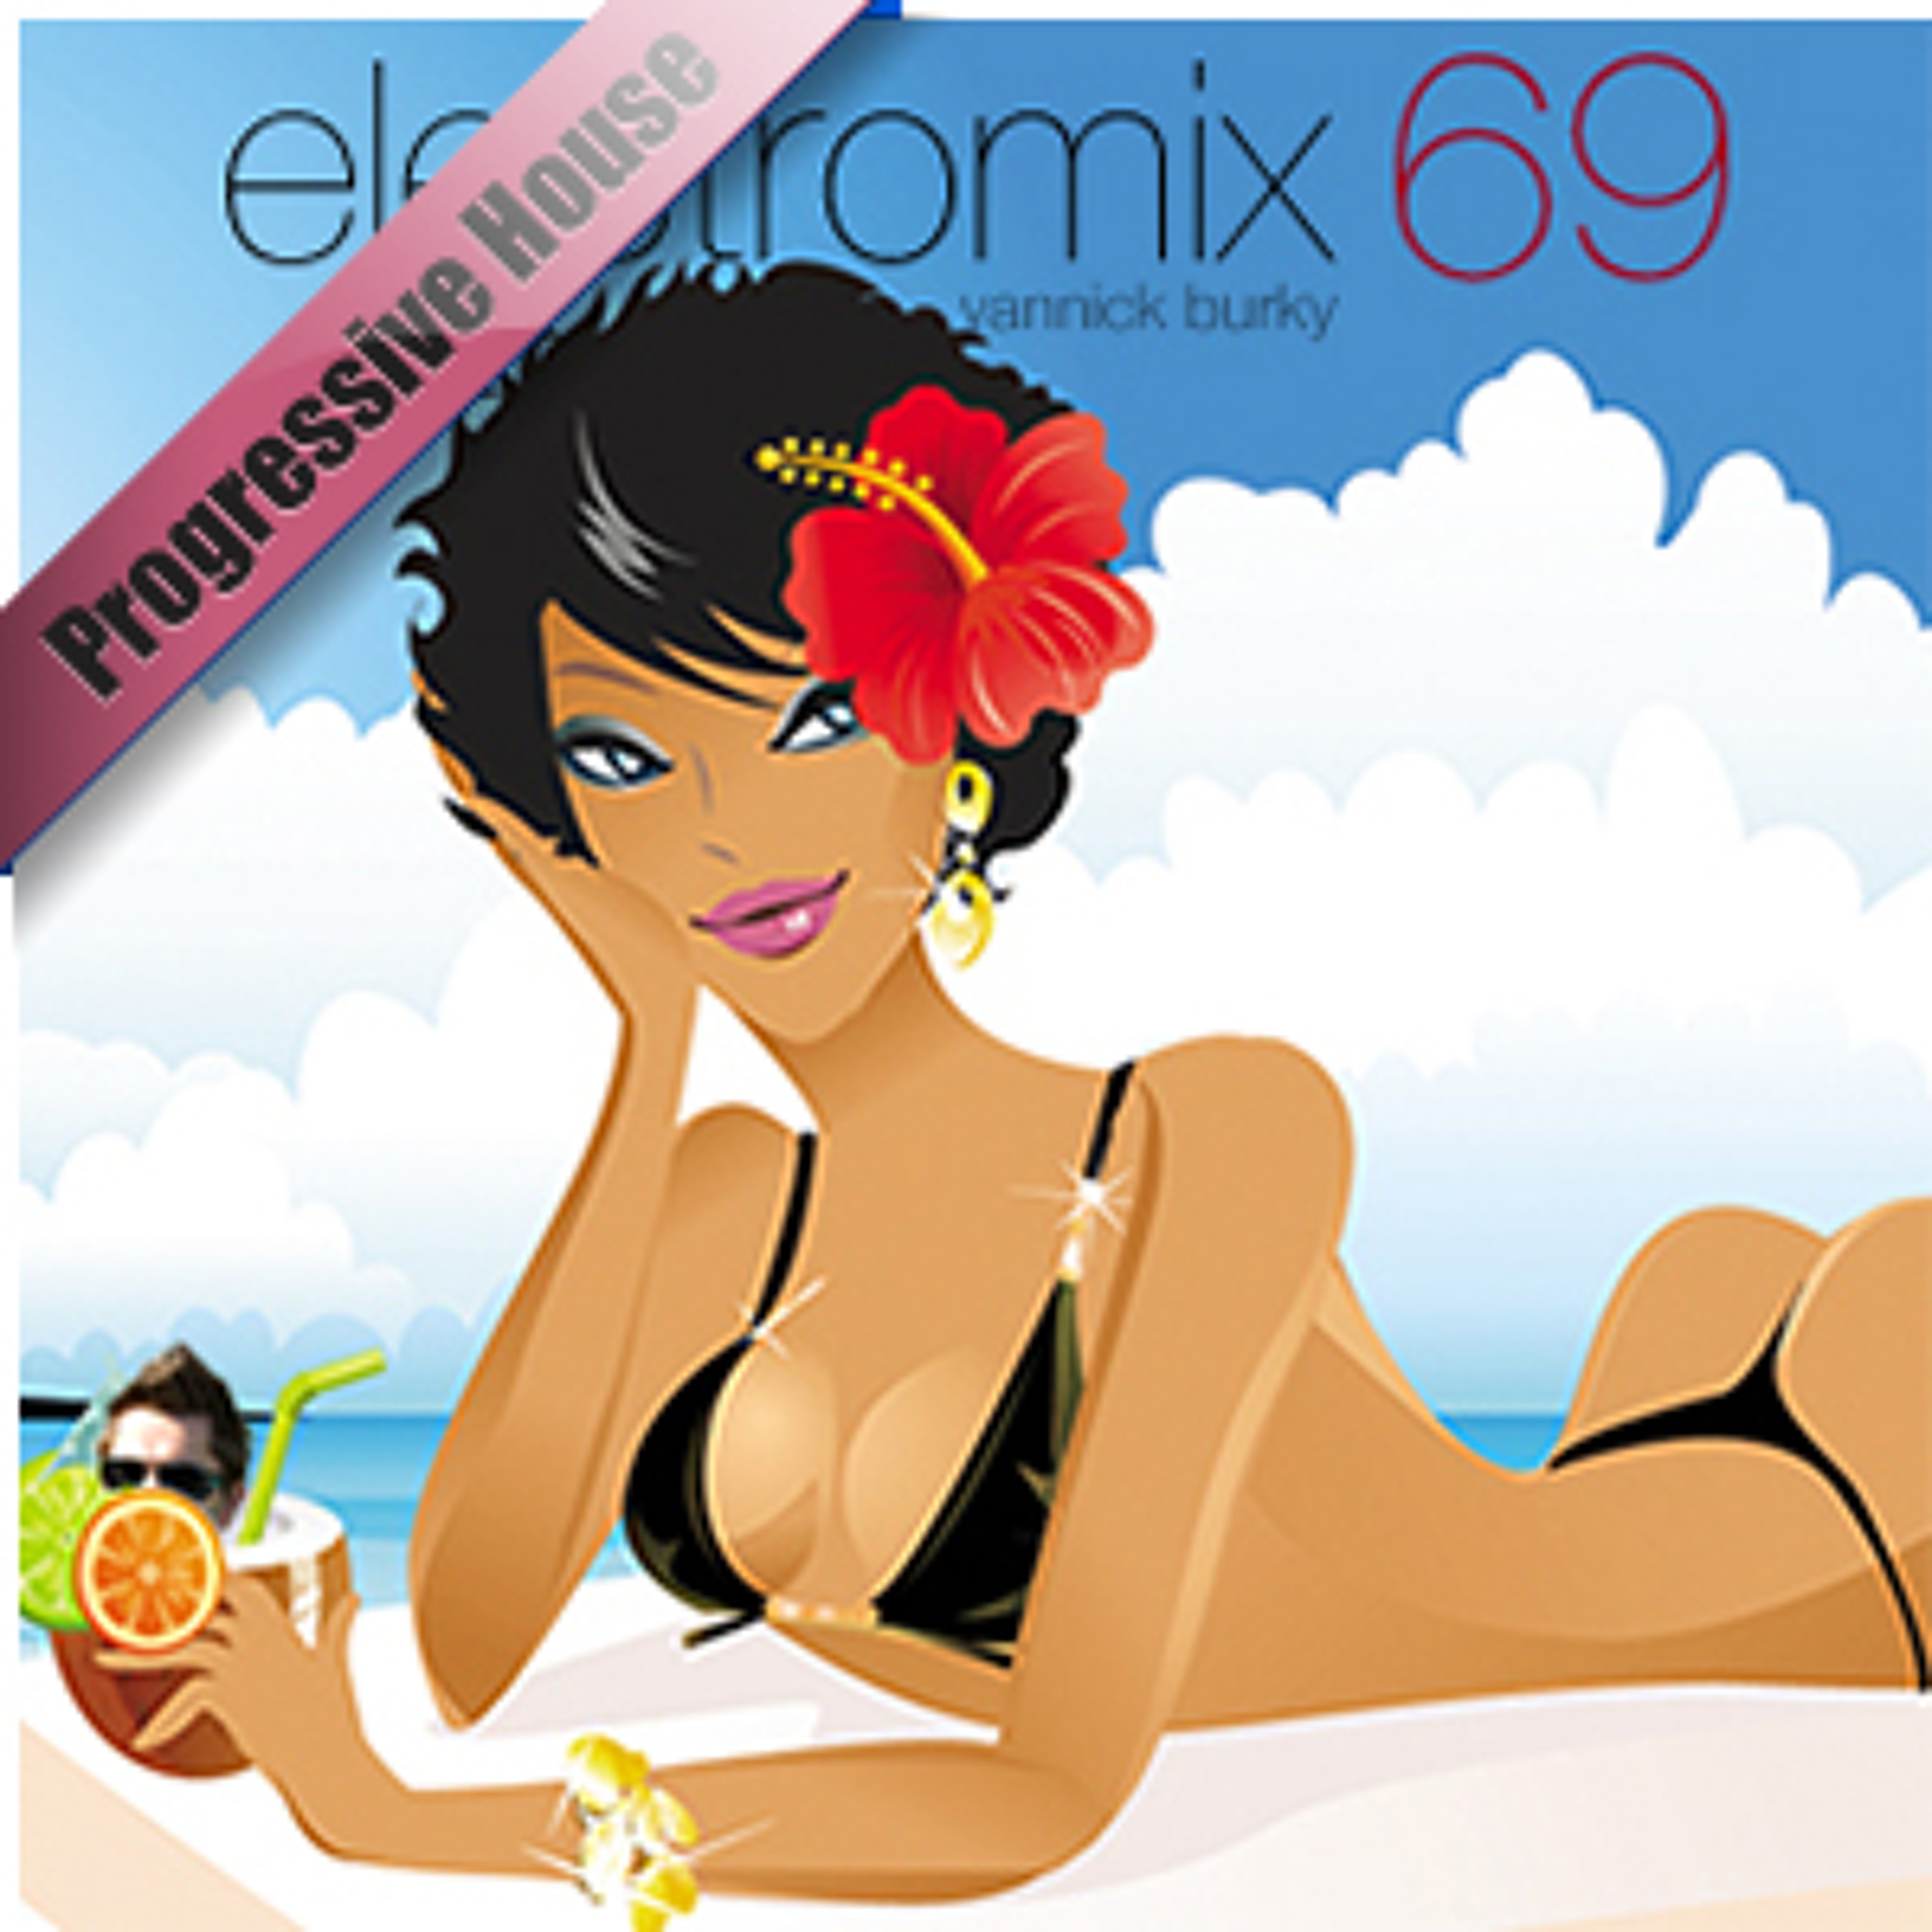 electromix 69 • House Music